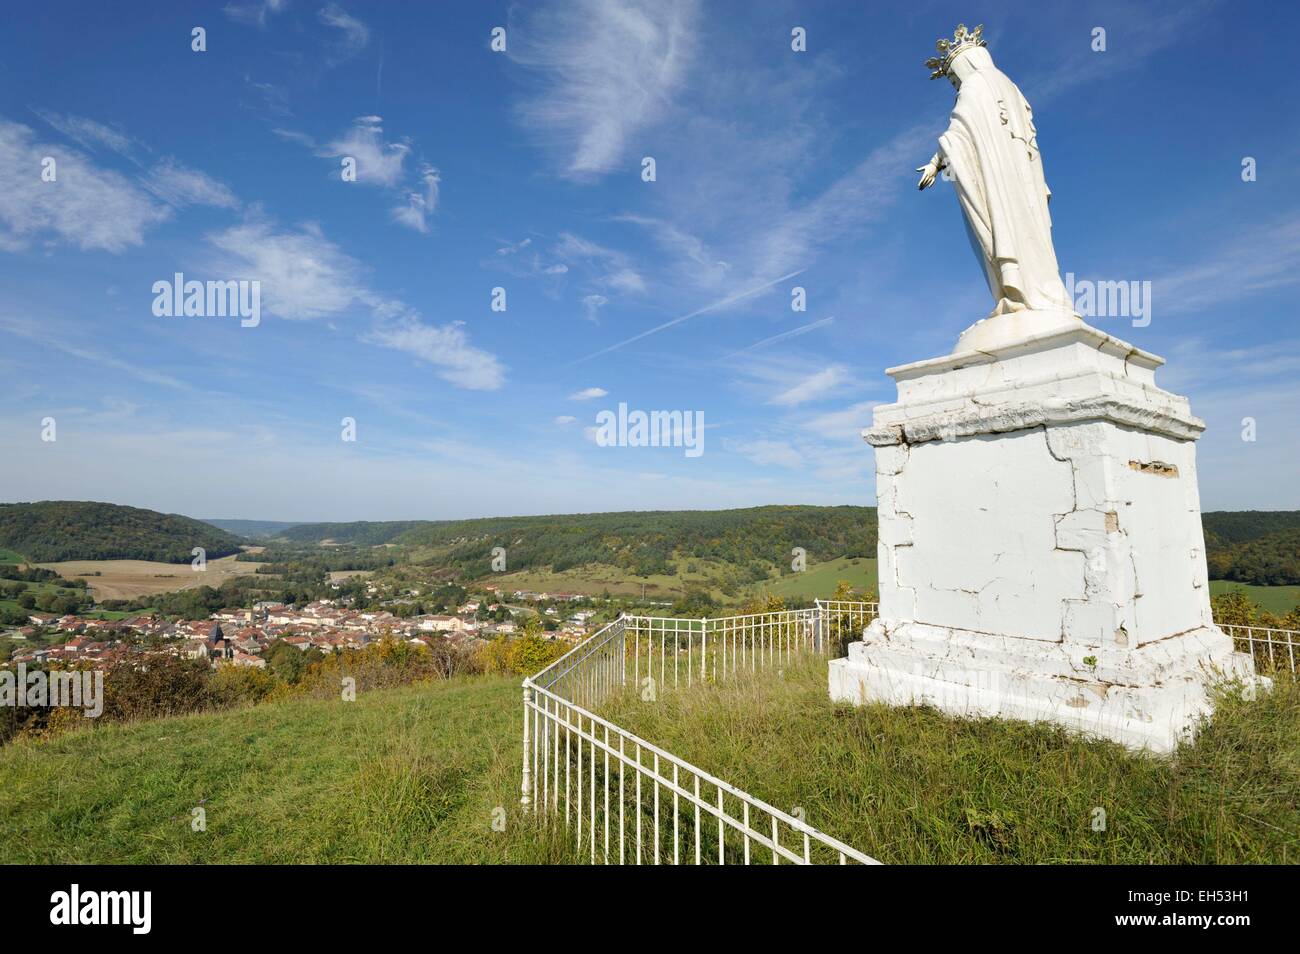 France, Haute Marne, Poissons, statue of Our Lady of Chatel overlooking the village Stock Photo